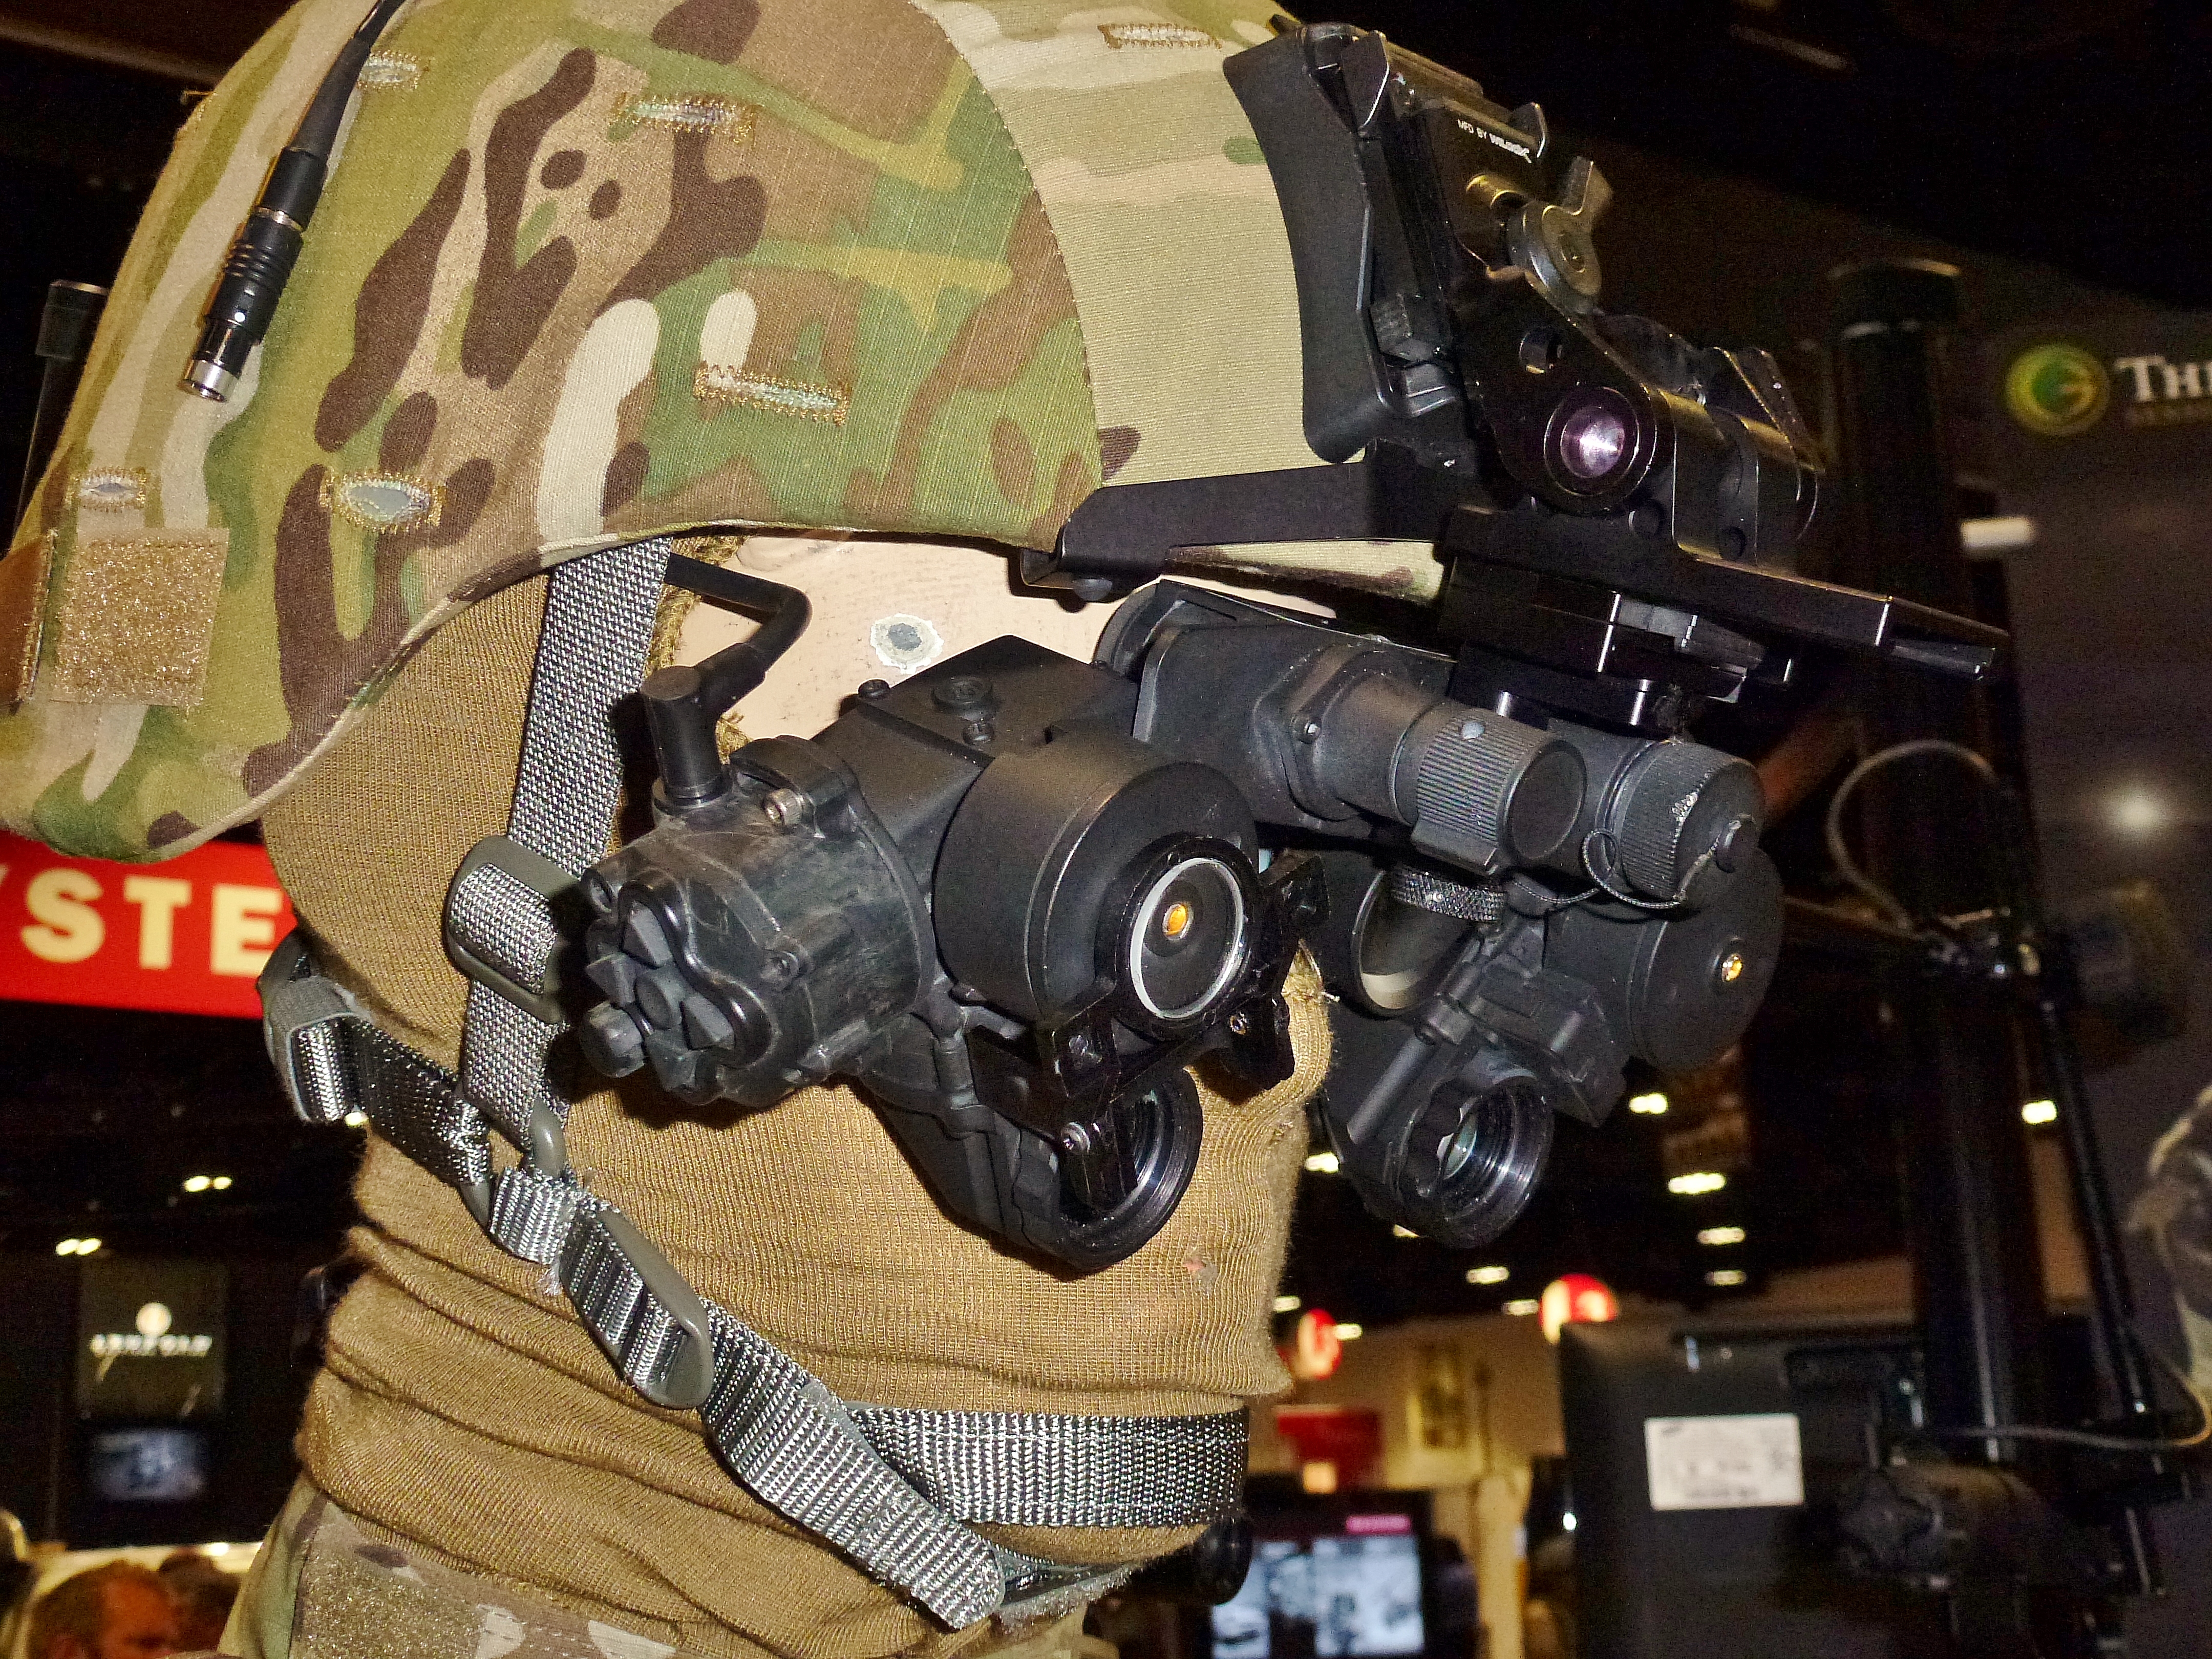 (Low Profile Night Vision Goggle), a rather impressive piece of technology....